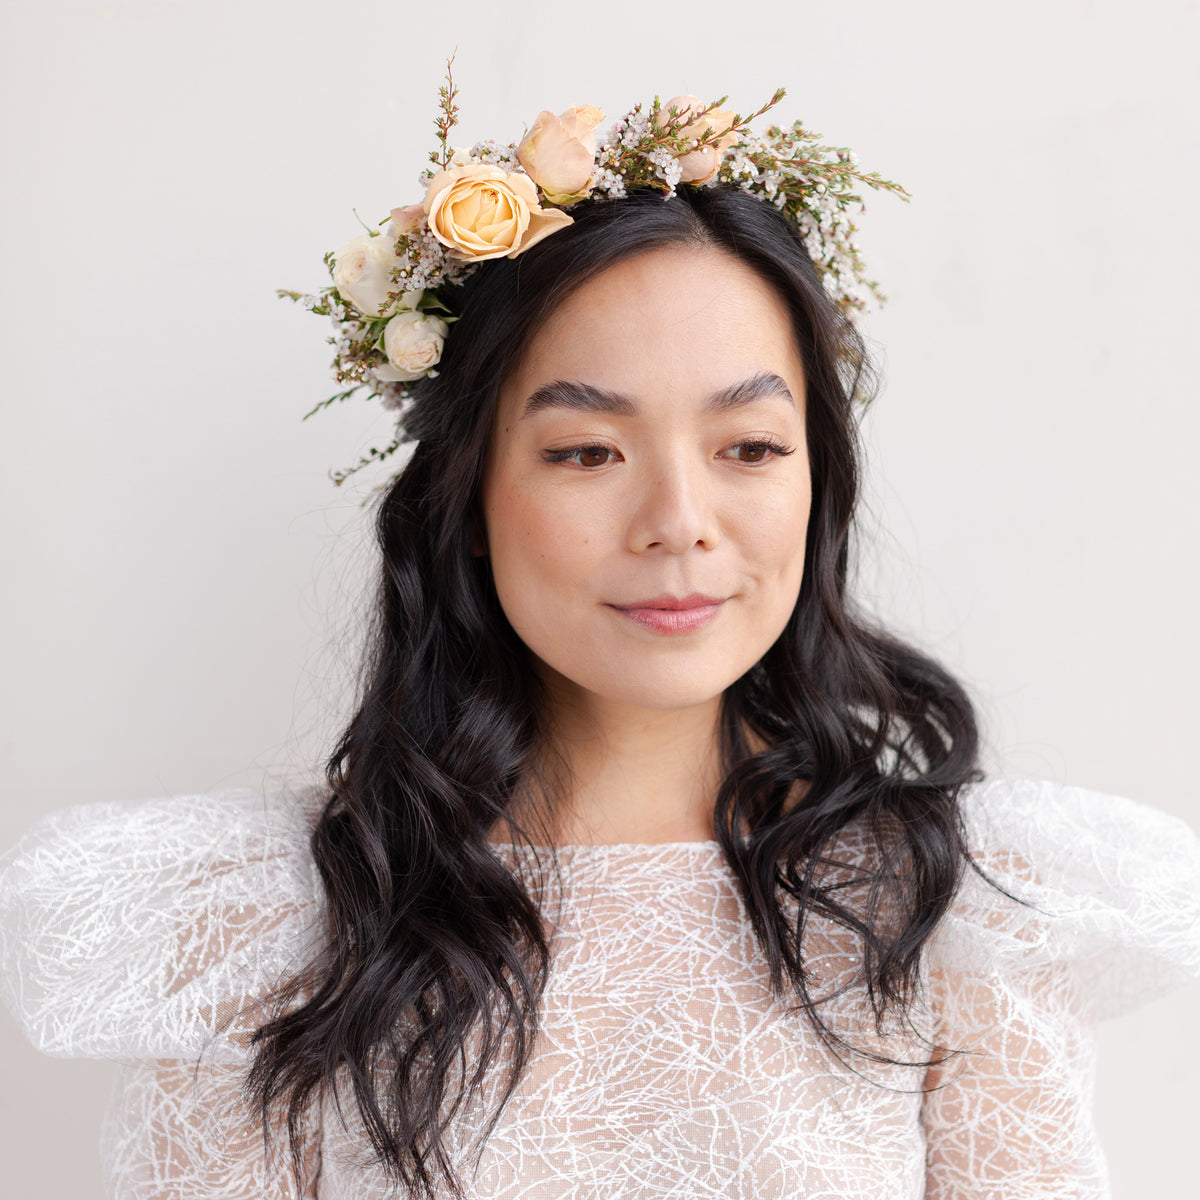 Style Me Beautiful Bridal Set, Bouquet and flower crown